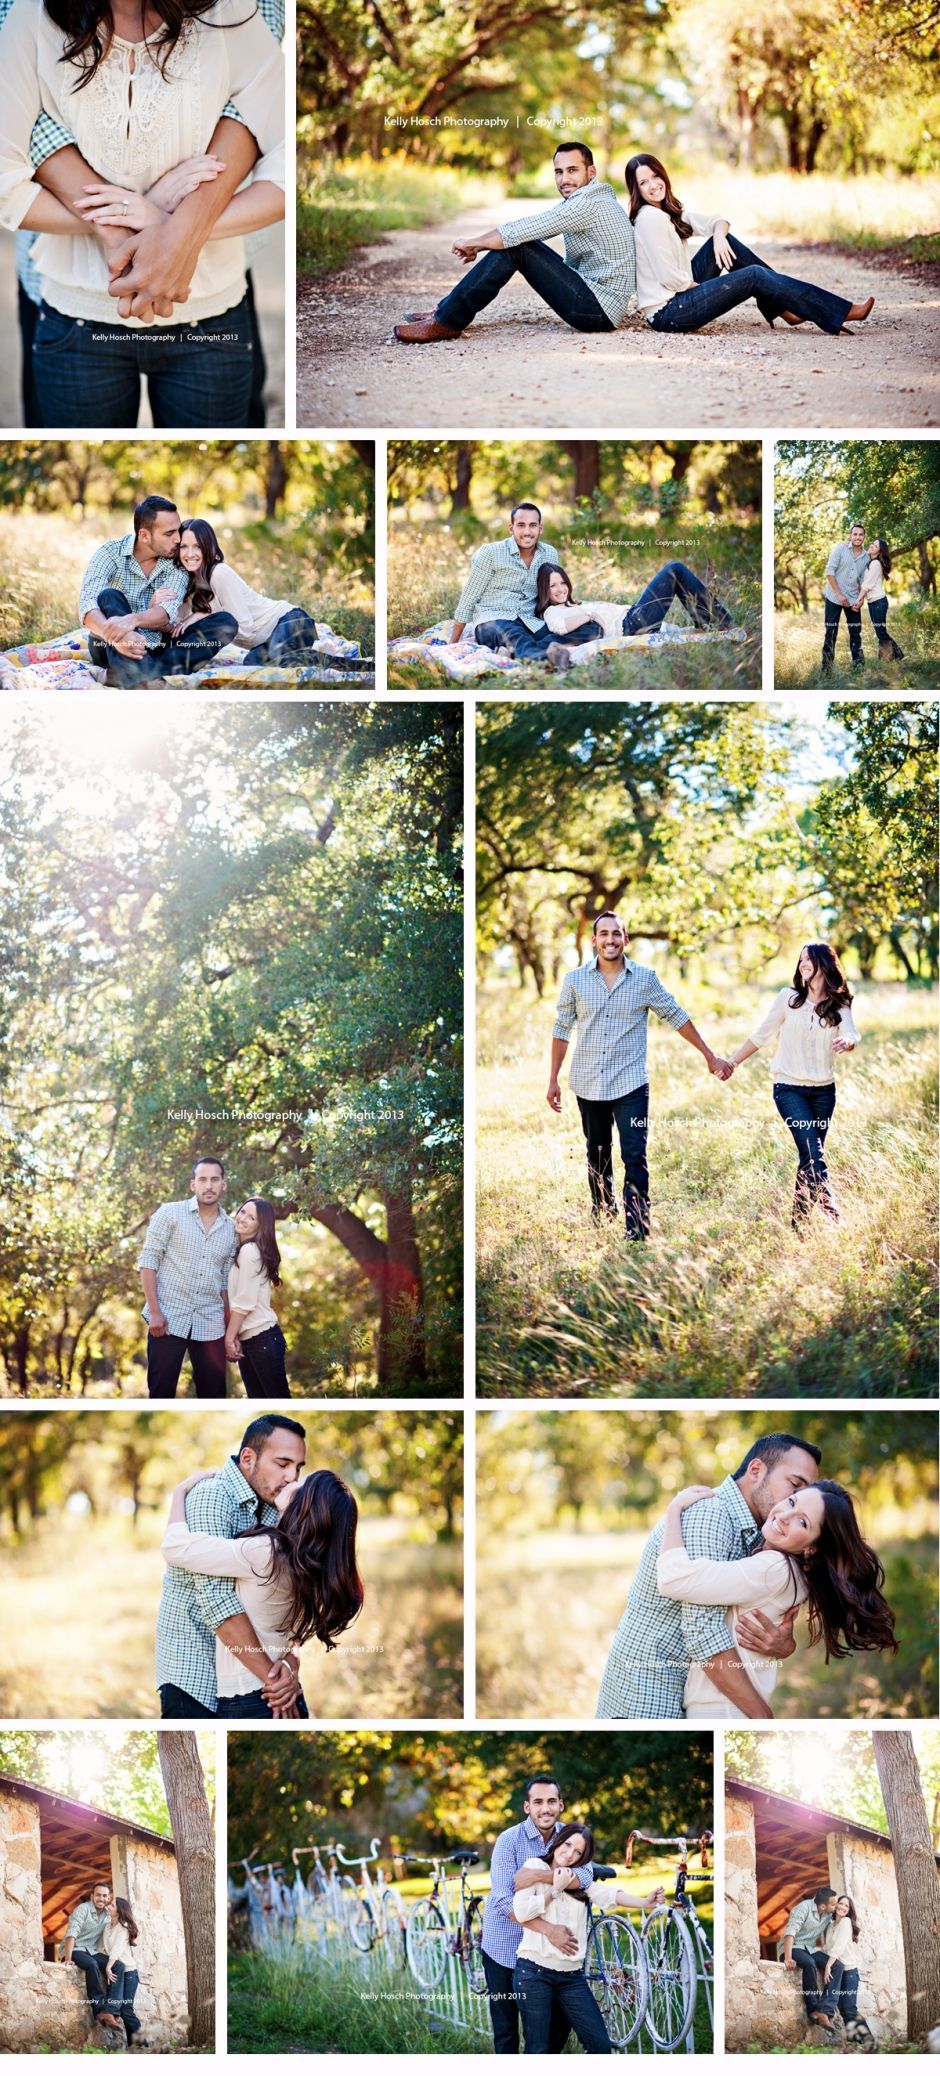 I want an outdoor engagement session with a vintage look. :)